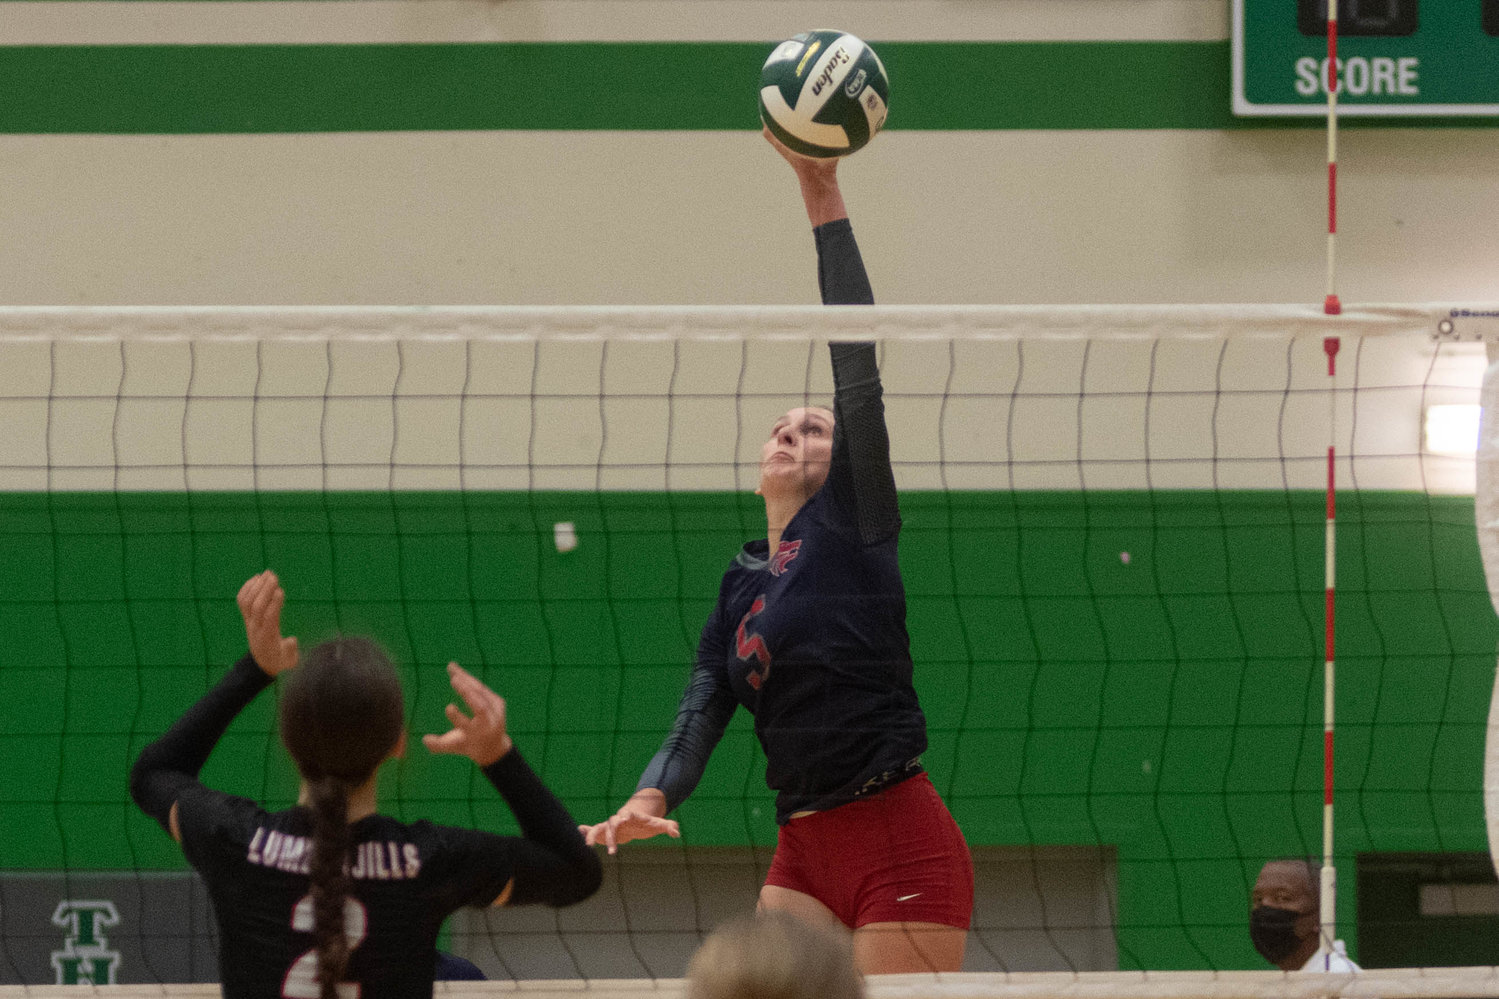 Black Hills senior Olivia Hisaw sends a spike over the net against R.A. Long in the opening round of the 2A District 4 tournament in Tumwater Nov. 11.